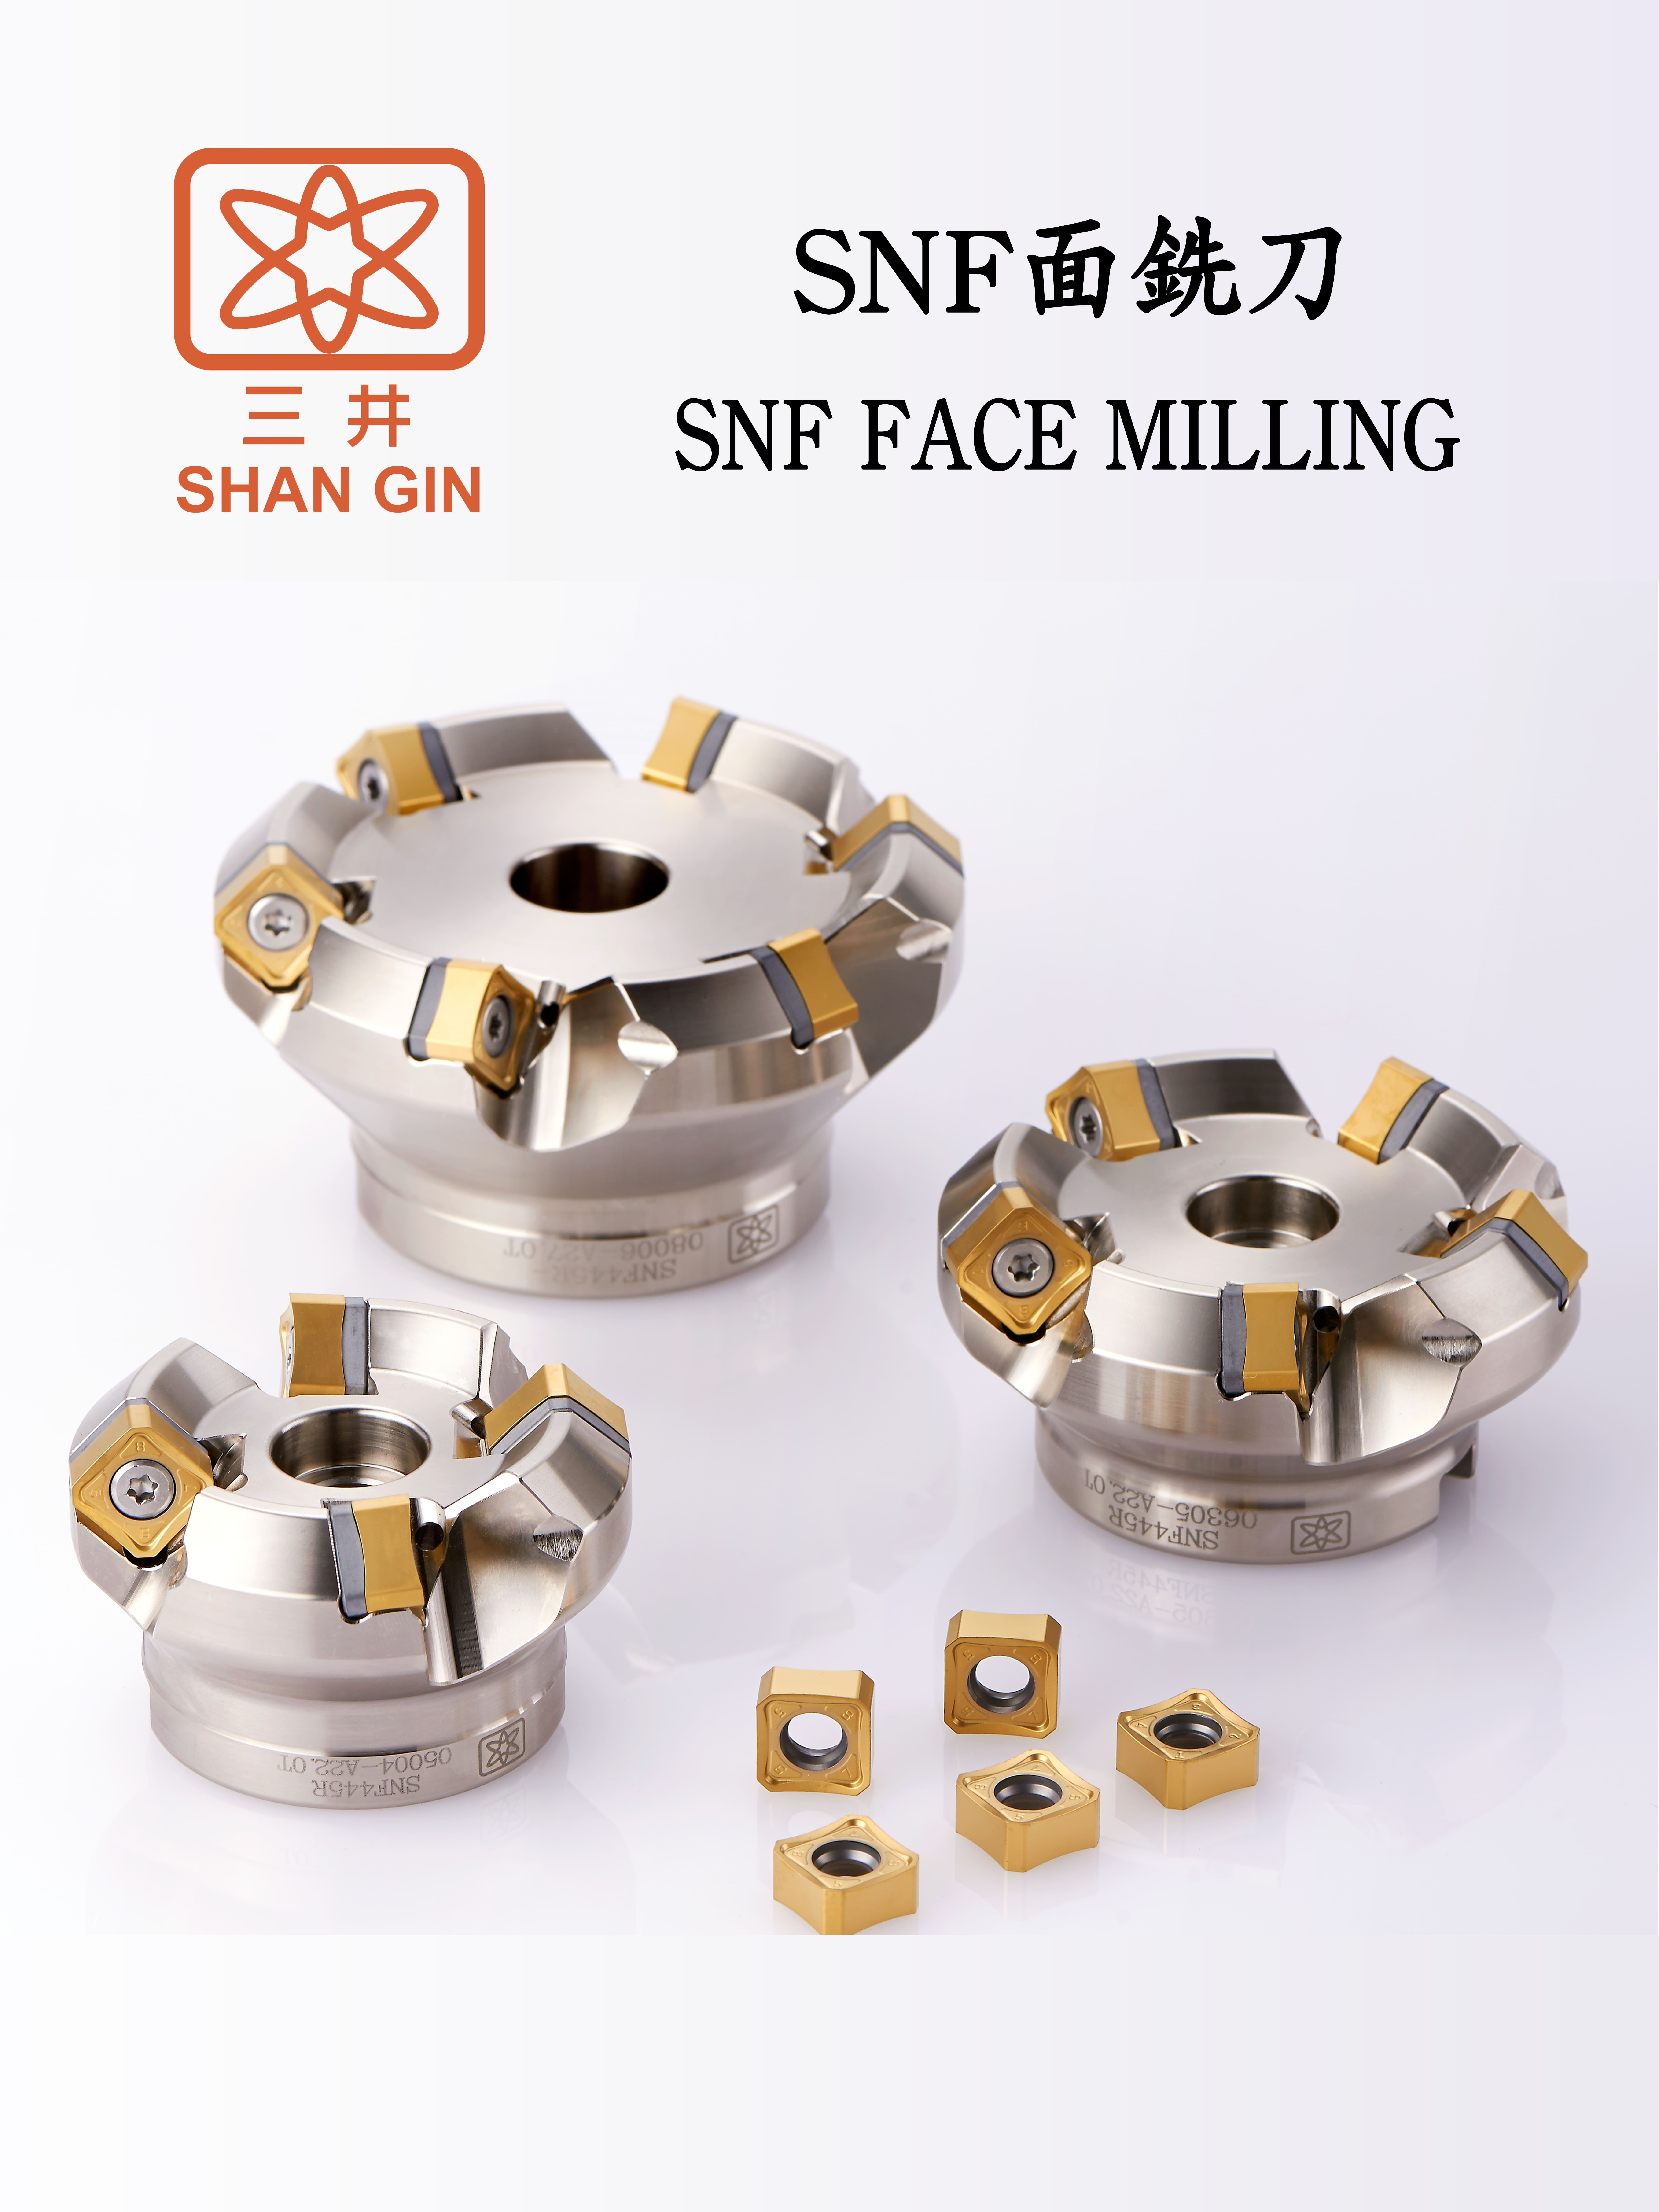 Products|SNF FACE MILLING